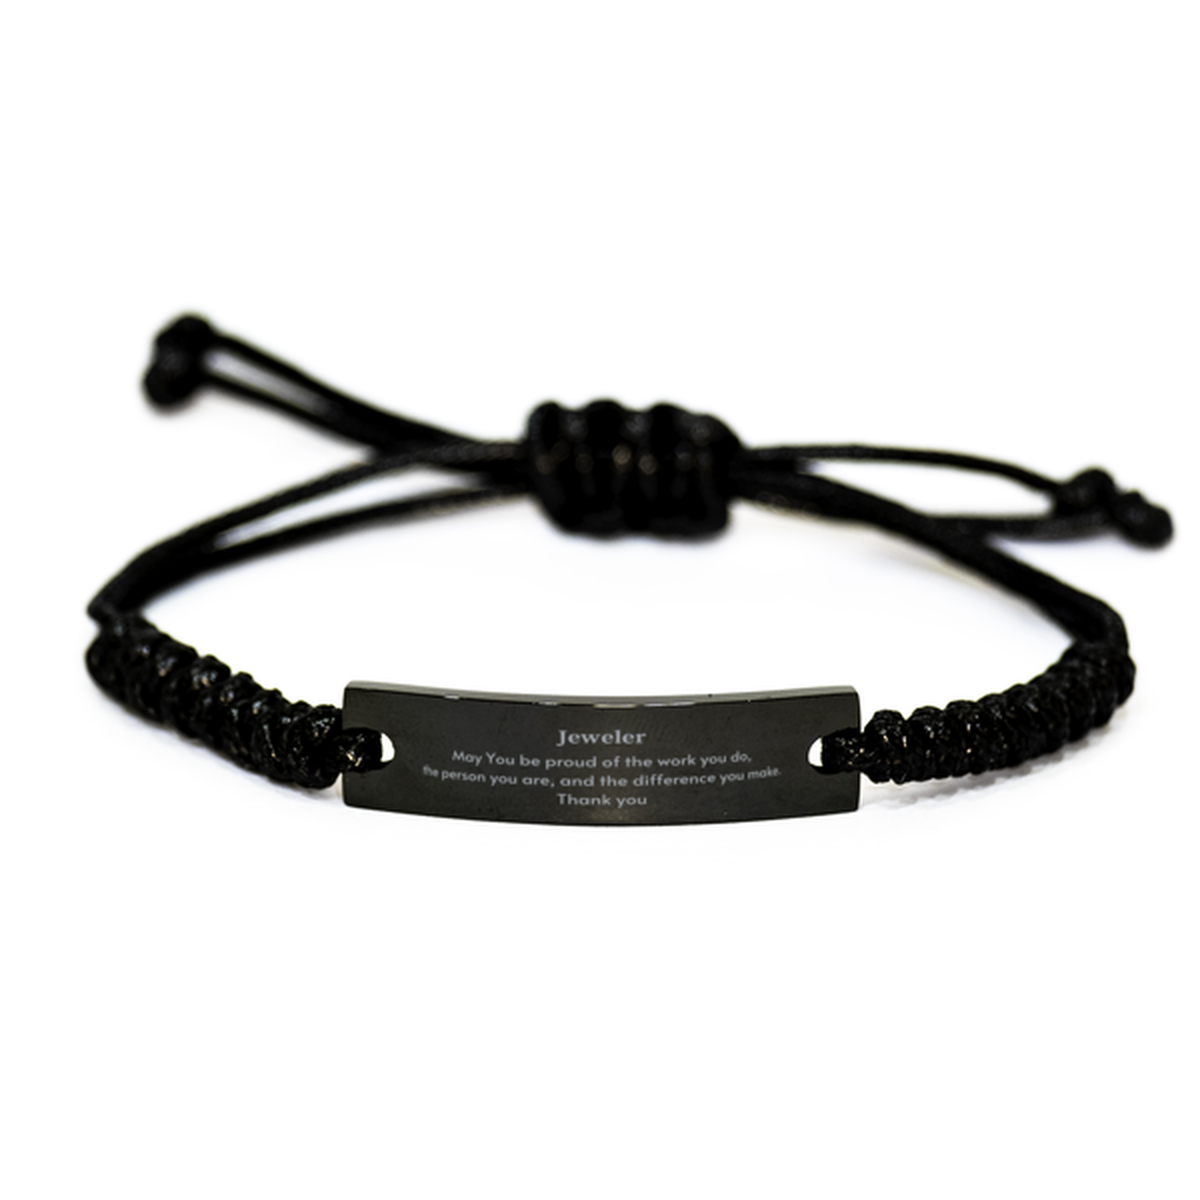 Heartwarming Black Rope Bracelet Retirement Coworkers Gifts for Jeweler, Jeweler May You be proud of the work you do, the person you are Gifts for Boss Men Women Friends